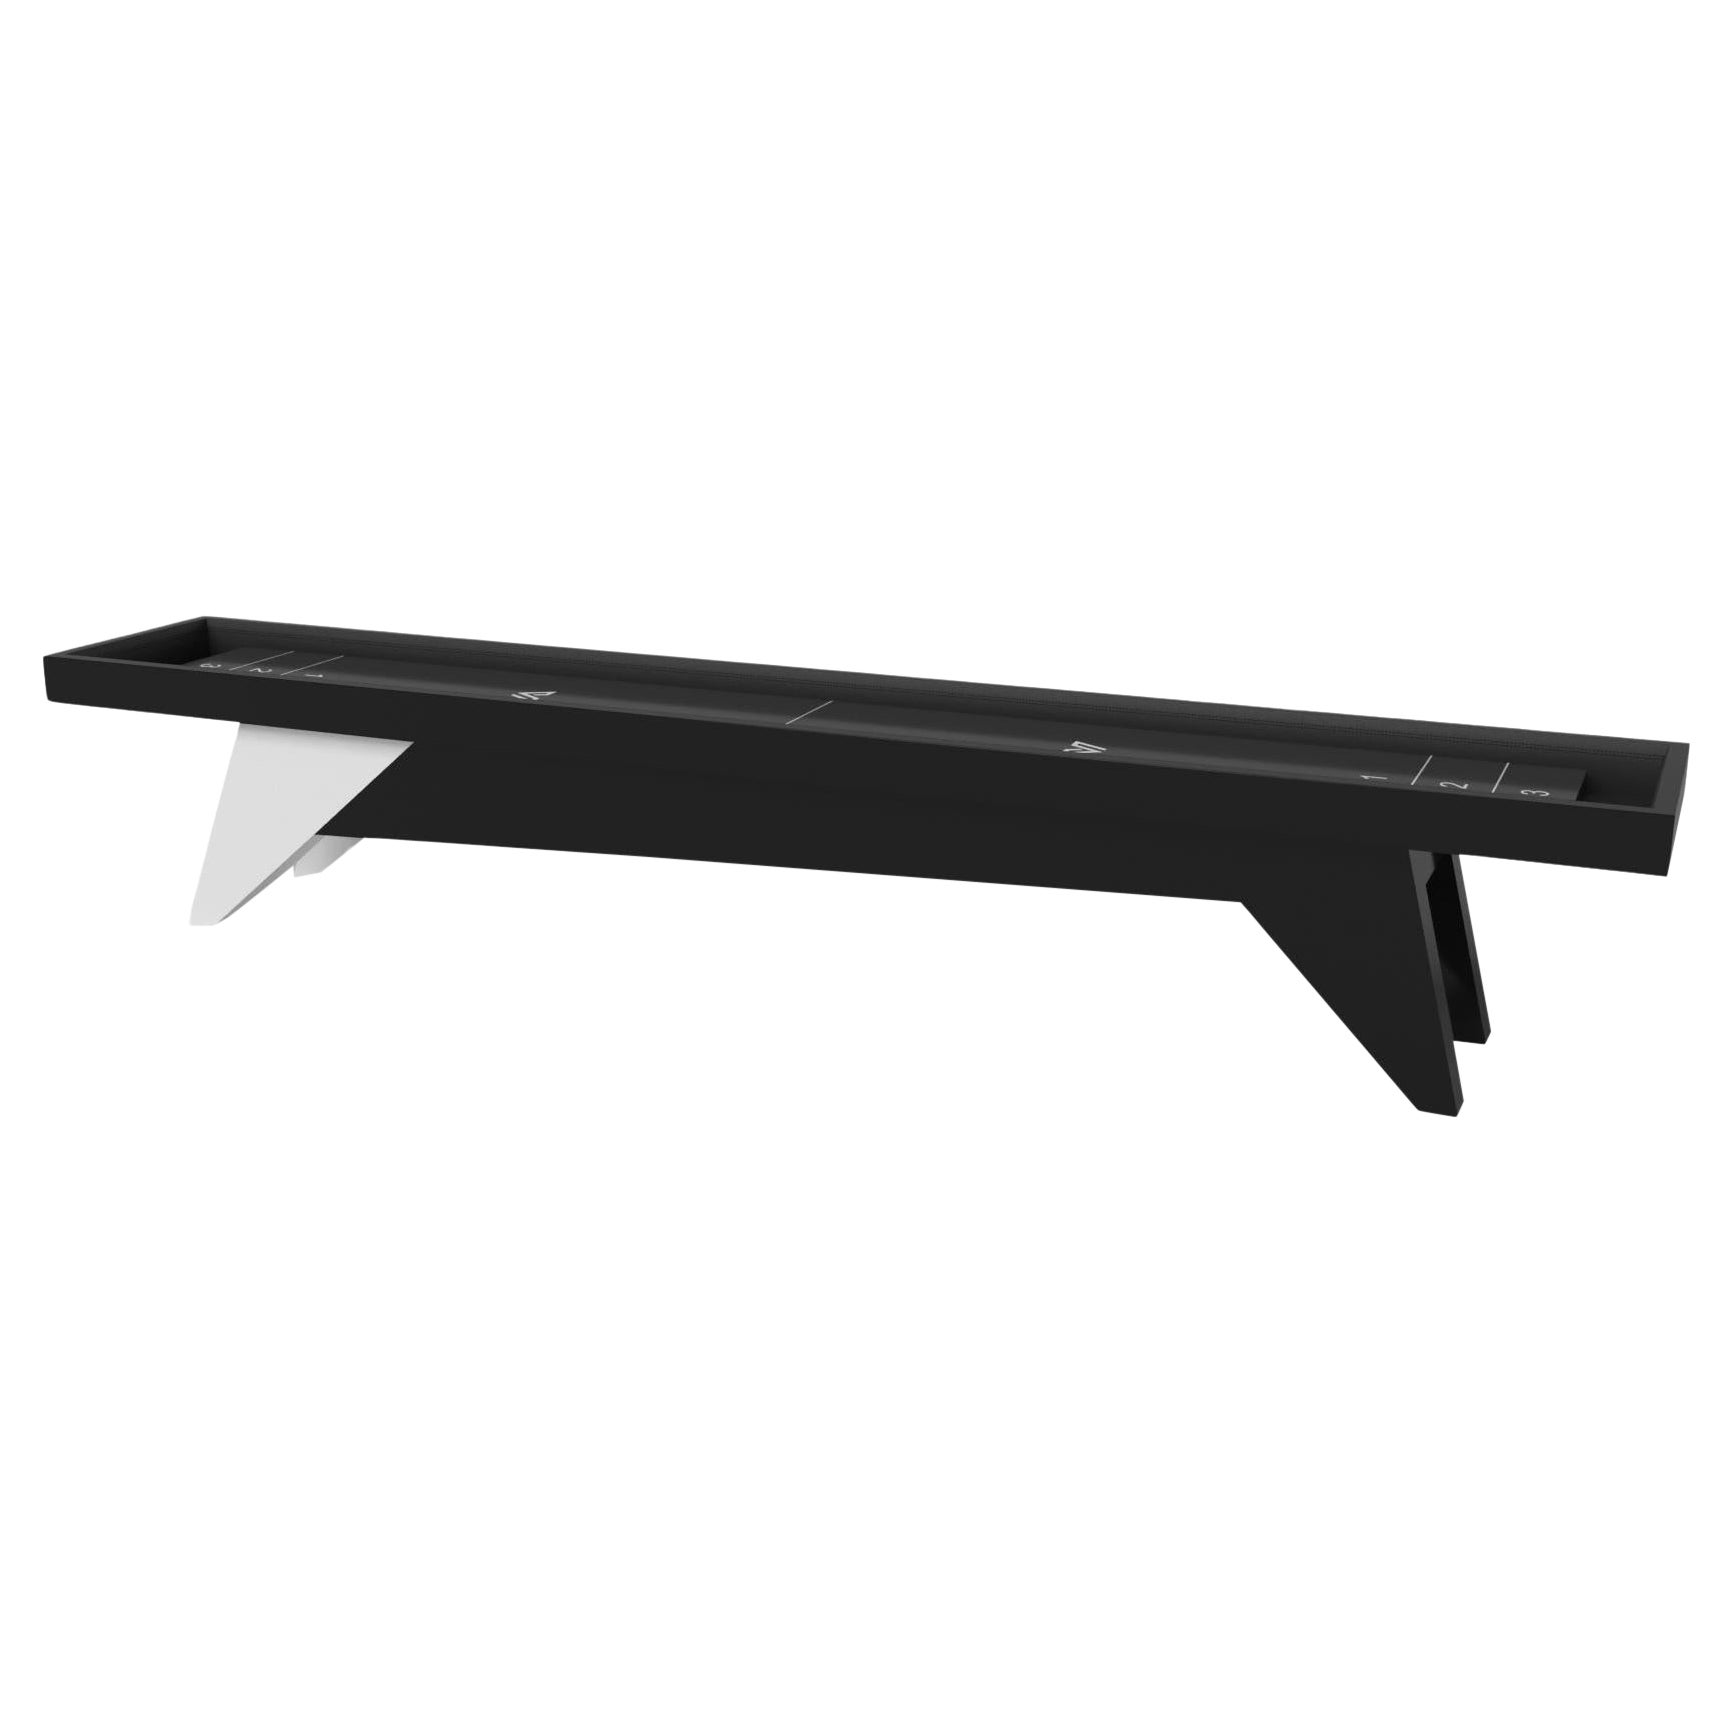 Elevate Customs Mantis Shuffleboard Tables/Solid Pantone Black Color in 12' -USA For Sale